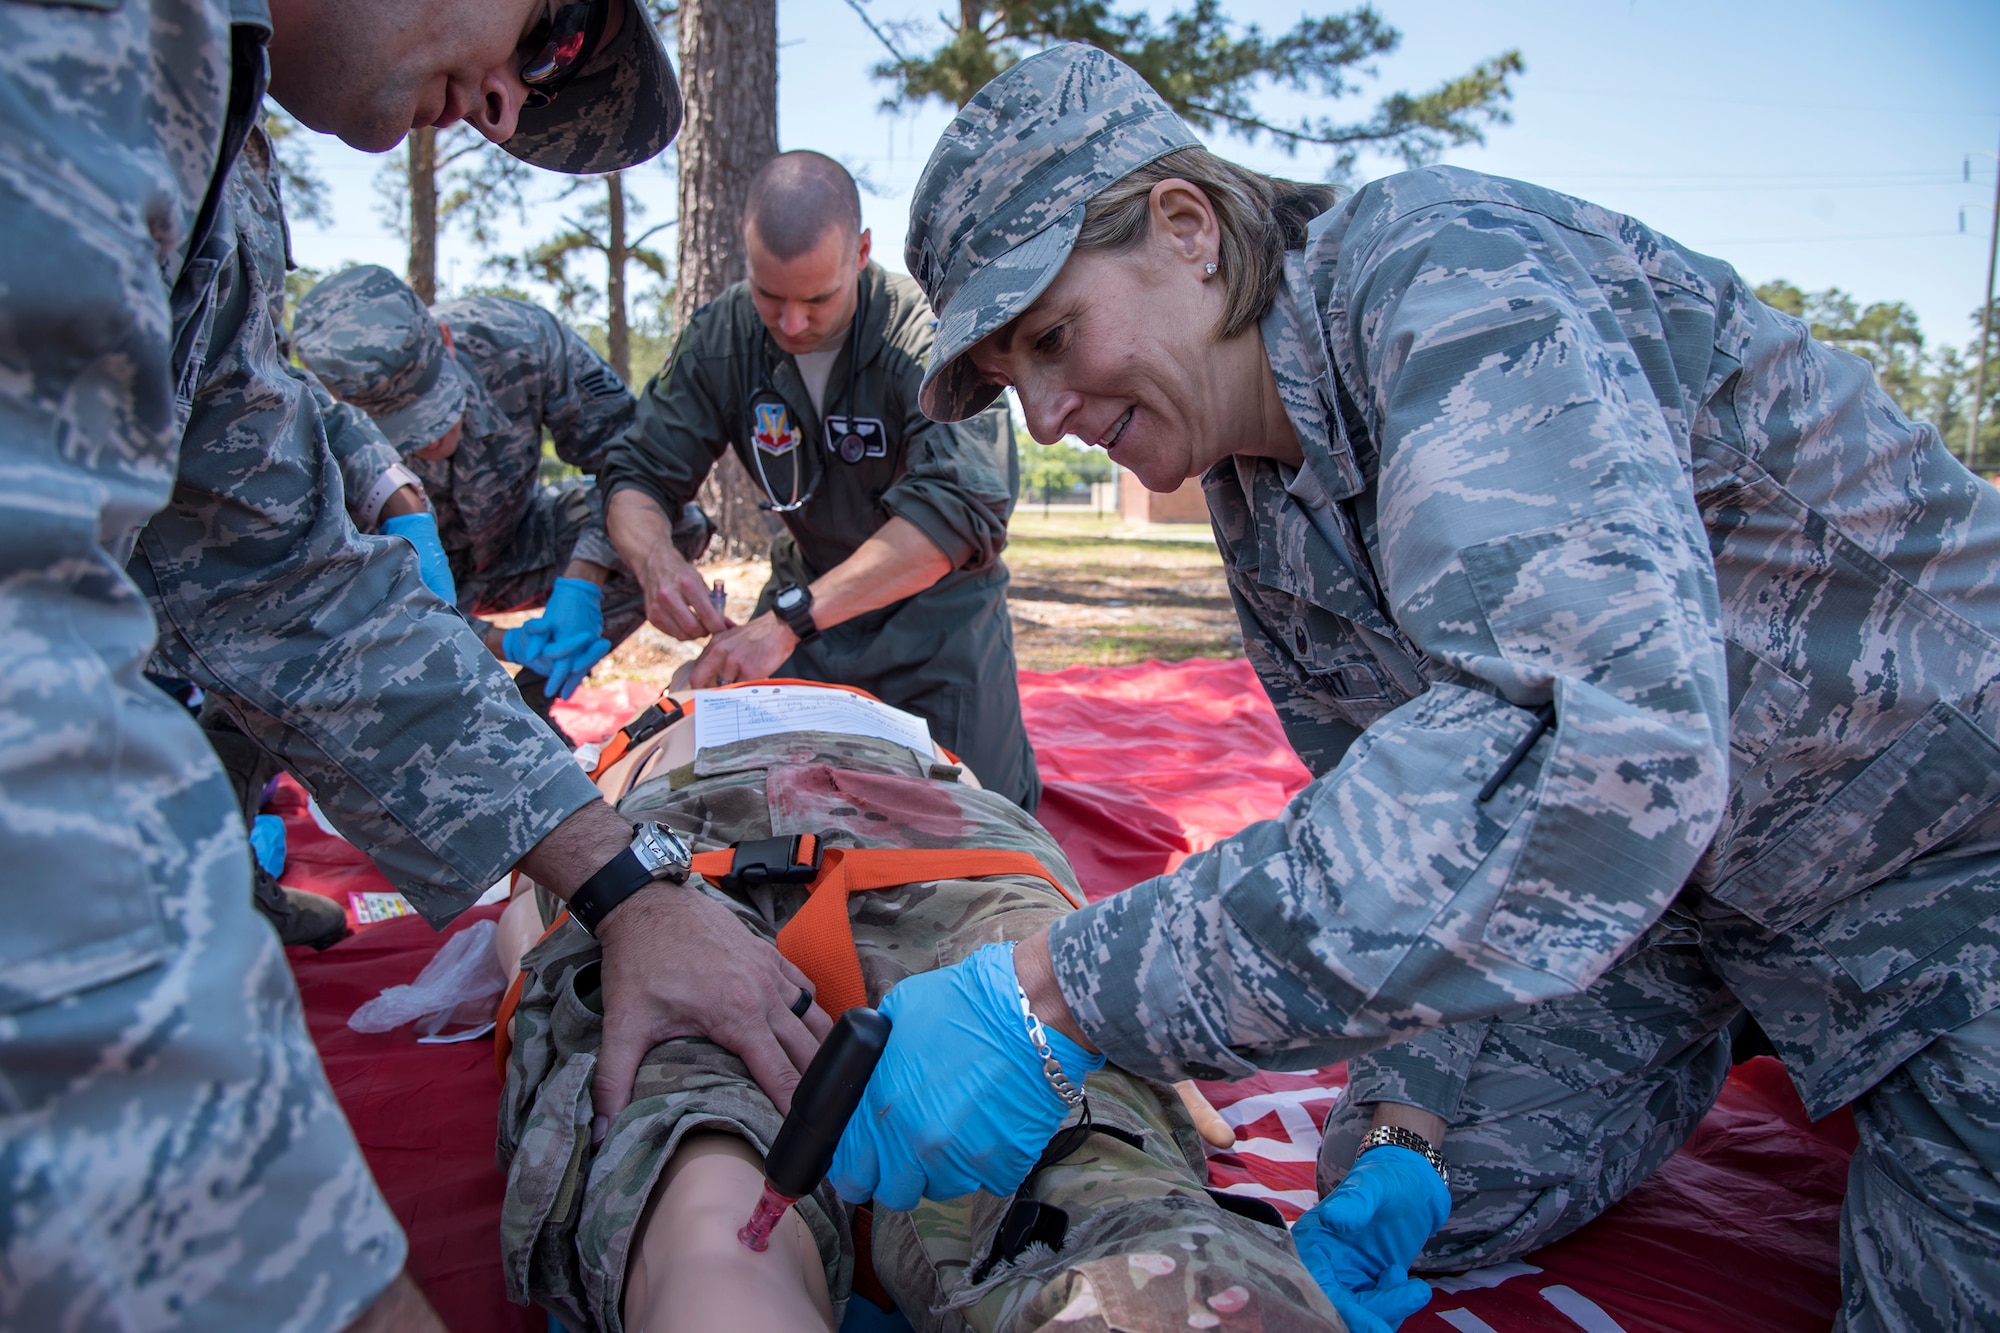 Col. Jennifer Short, right, 23d Wing commander, creates an intravenous incision into the leg of a mannequin, April 30, 2018, at Moody Air Force Base, Ga. Short toured the 23d Medical Group (MDG) to gain a better understanding of their overall mission, capabilities, and comprehensive duties, and was able to experience the day-to-day operations of the various units within the 23d MDG, ranging from bioenvironmental to ambulatory care. (U.S. Air Force photo by Airman 1st Class Eugene Oliver)